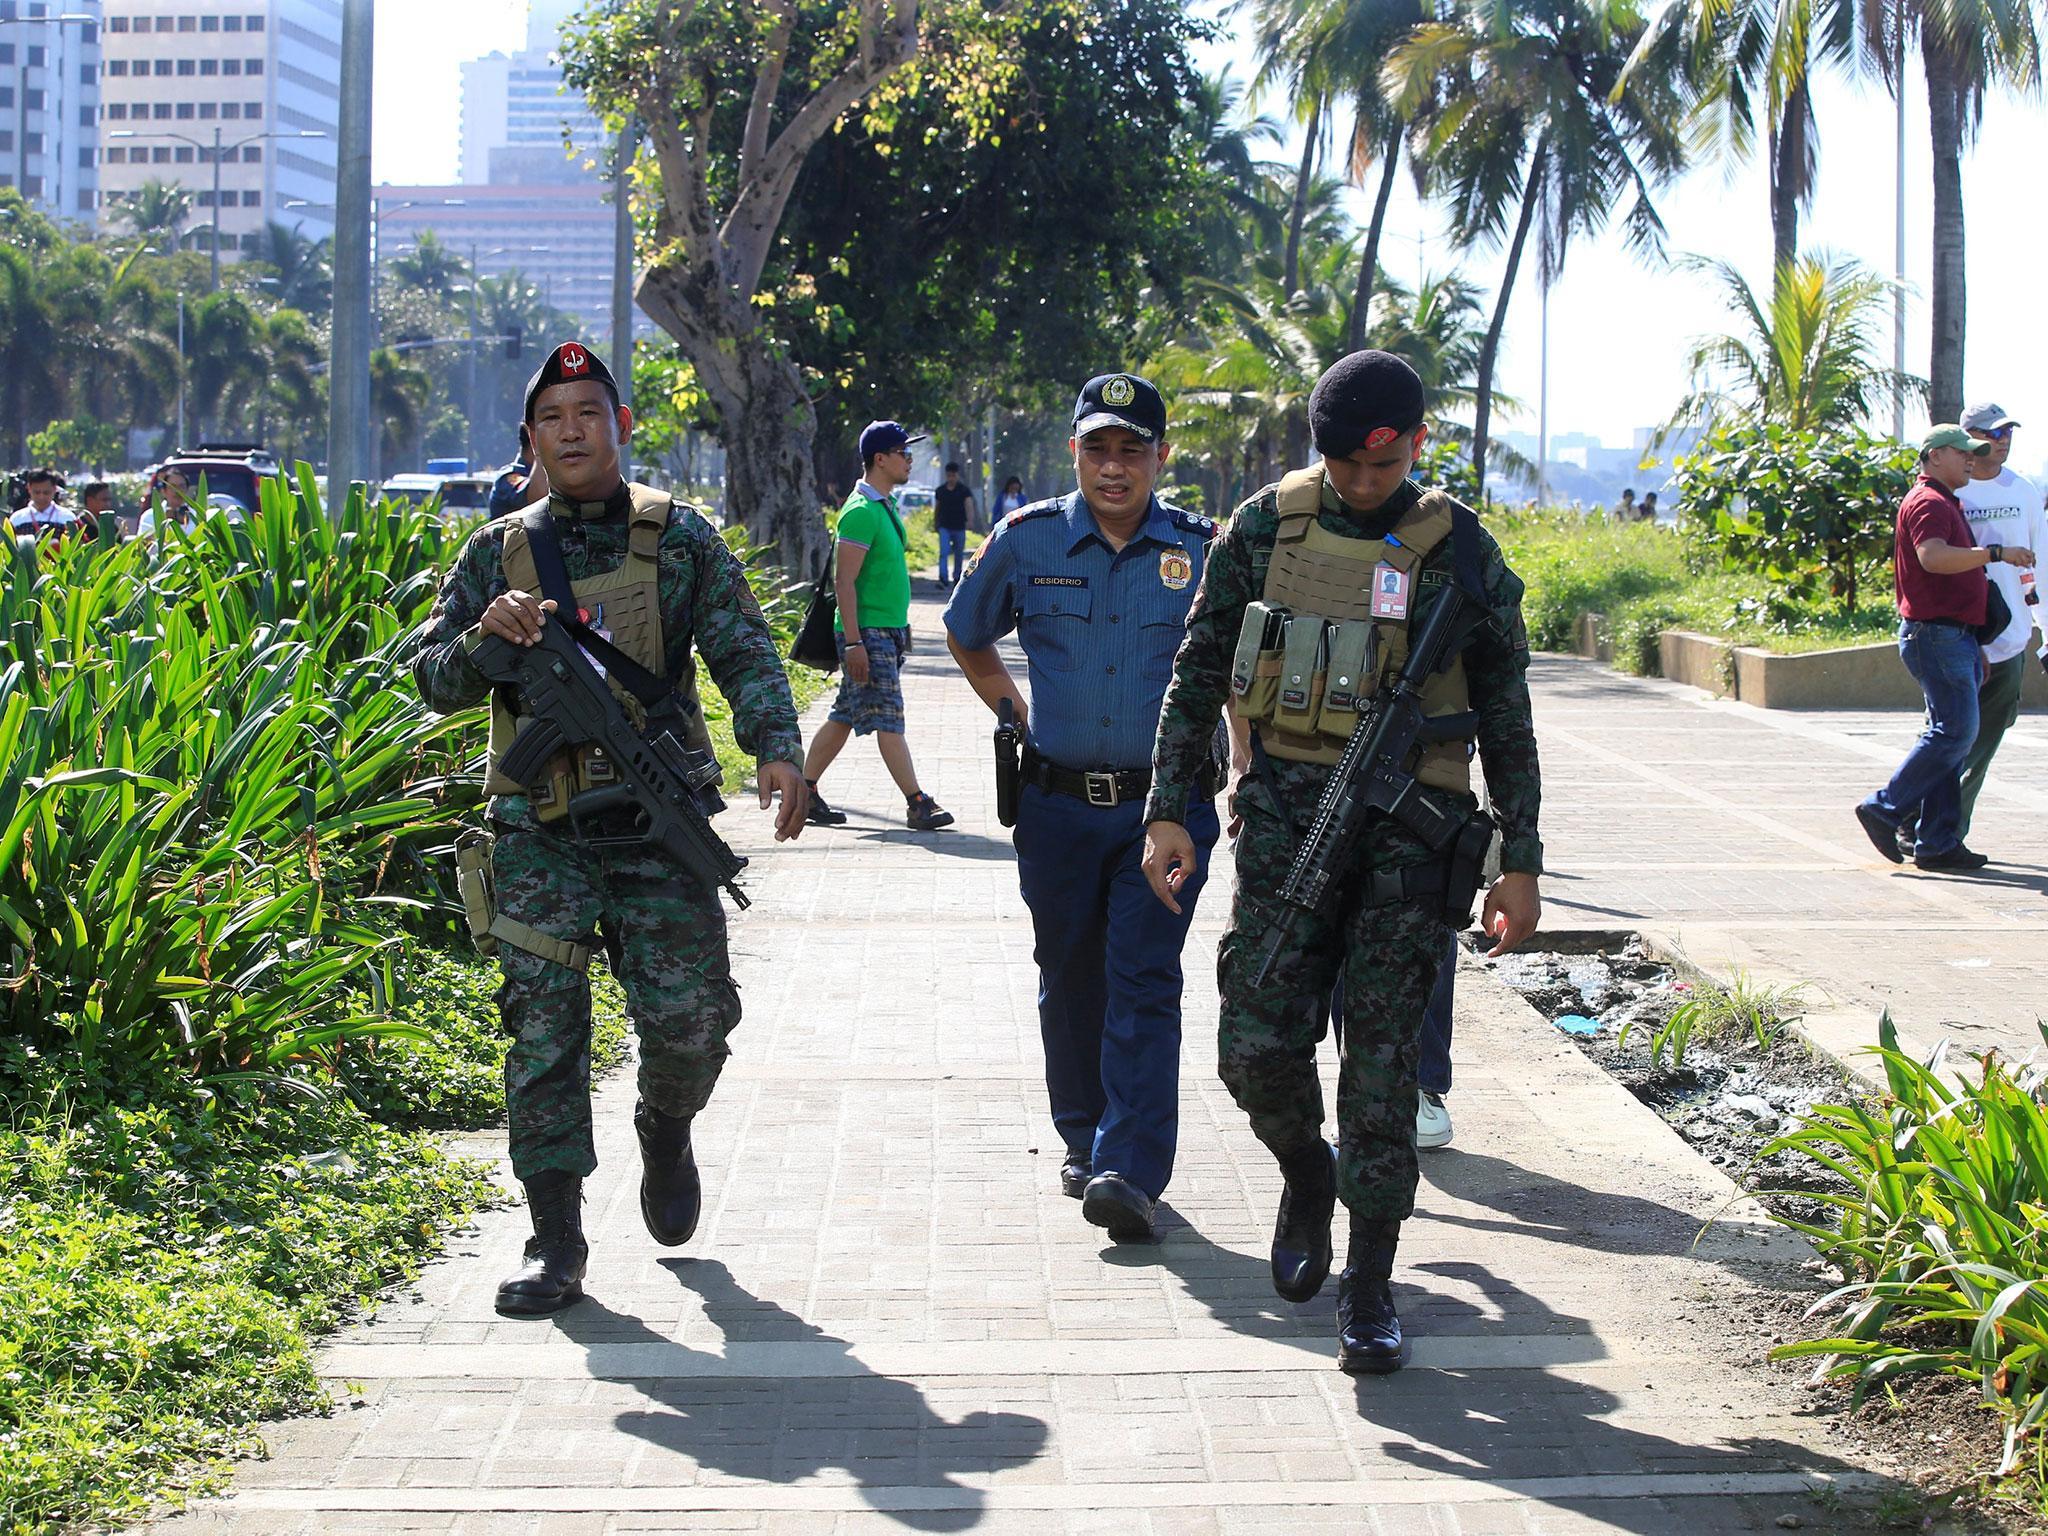 The Philippine police on patrol after an IED was found near the US embassy in Manila